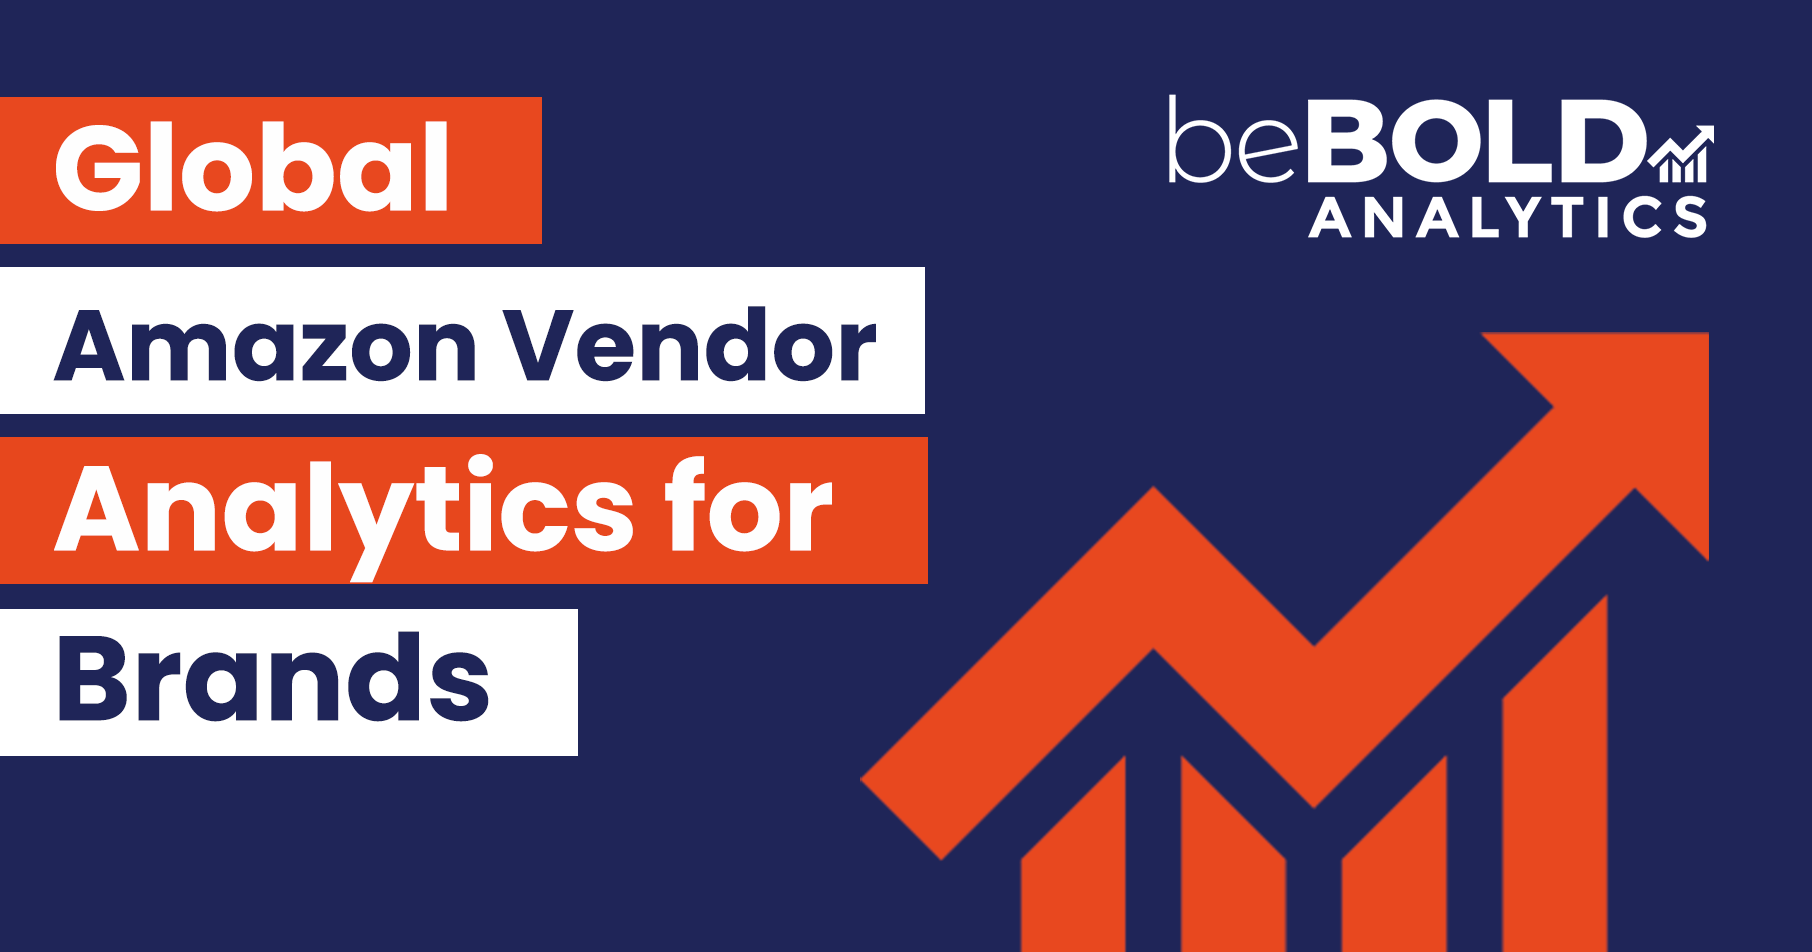 Why Amazon Vendors need beBOLD Analytics: Gain Insights in Seconds